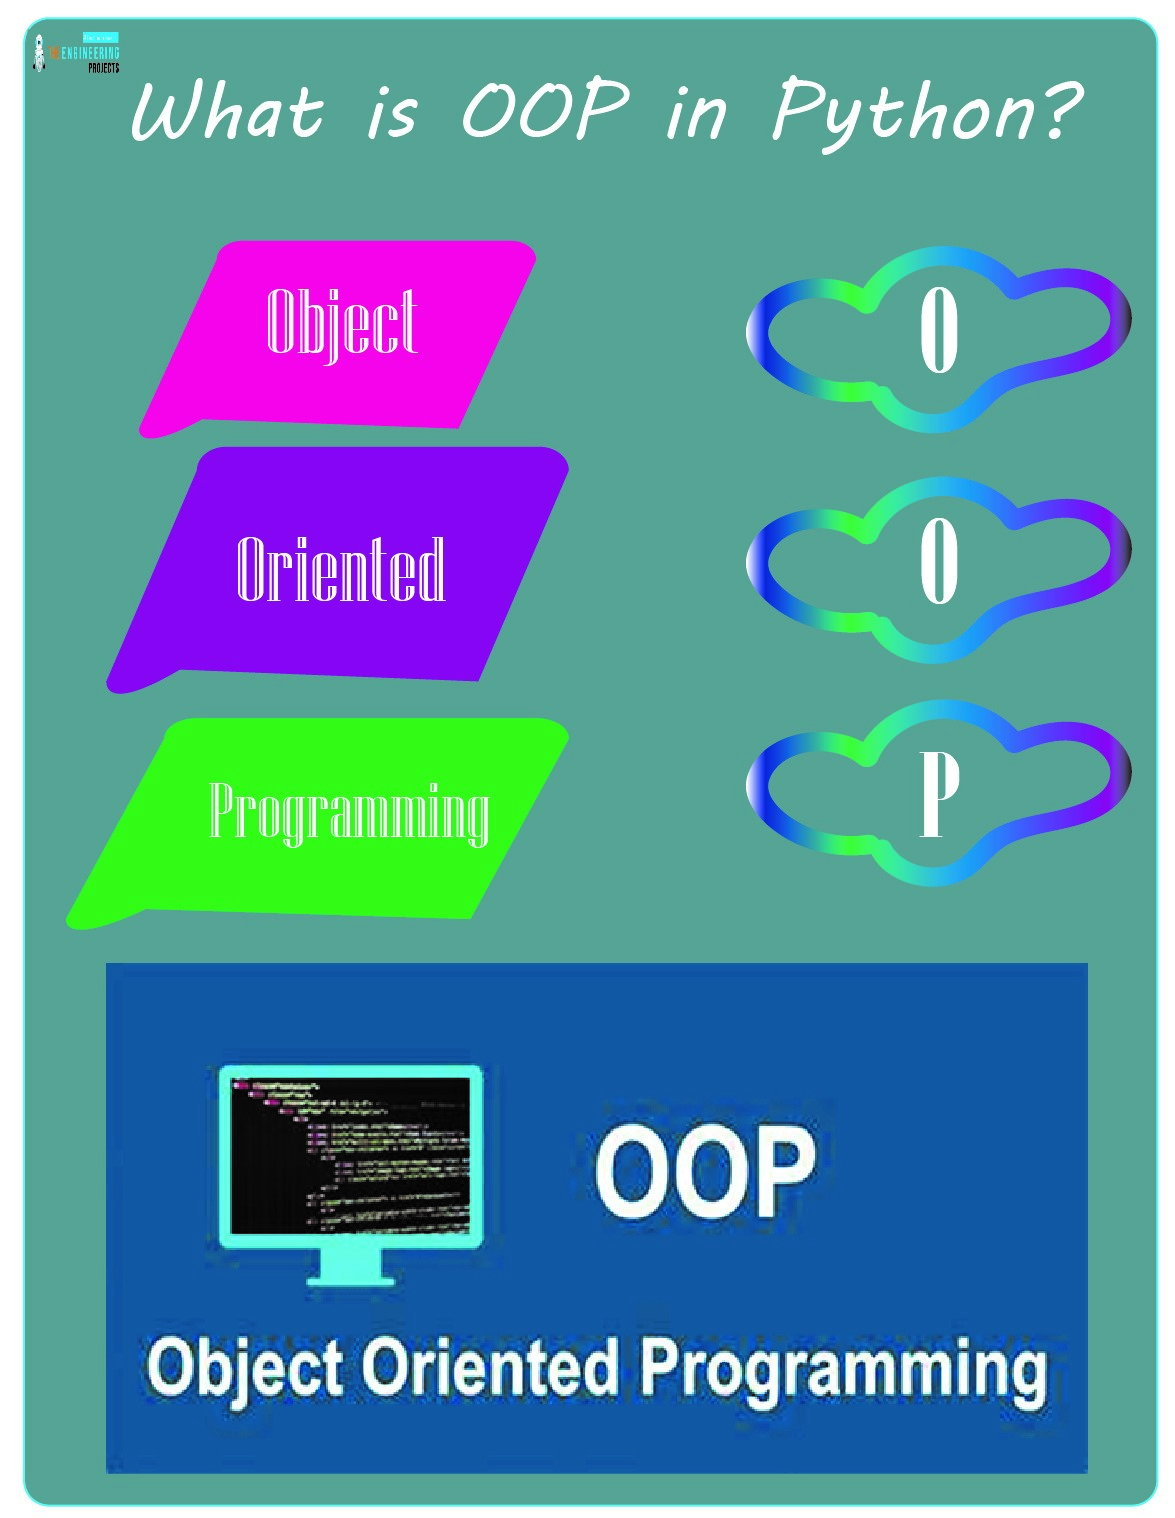 Object Oriented Programming in Python, Python Object Oriented Programming, python oop, oop python